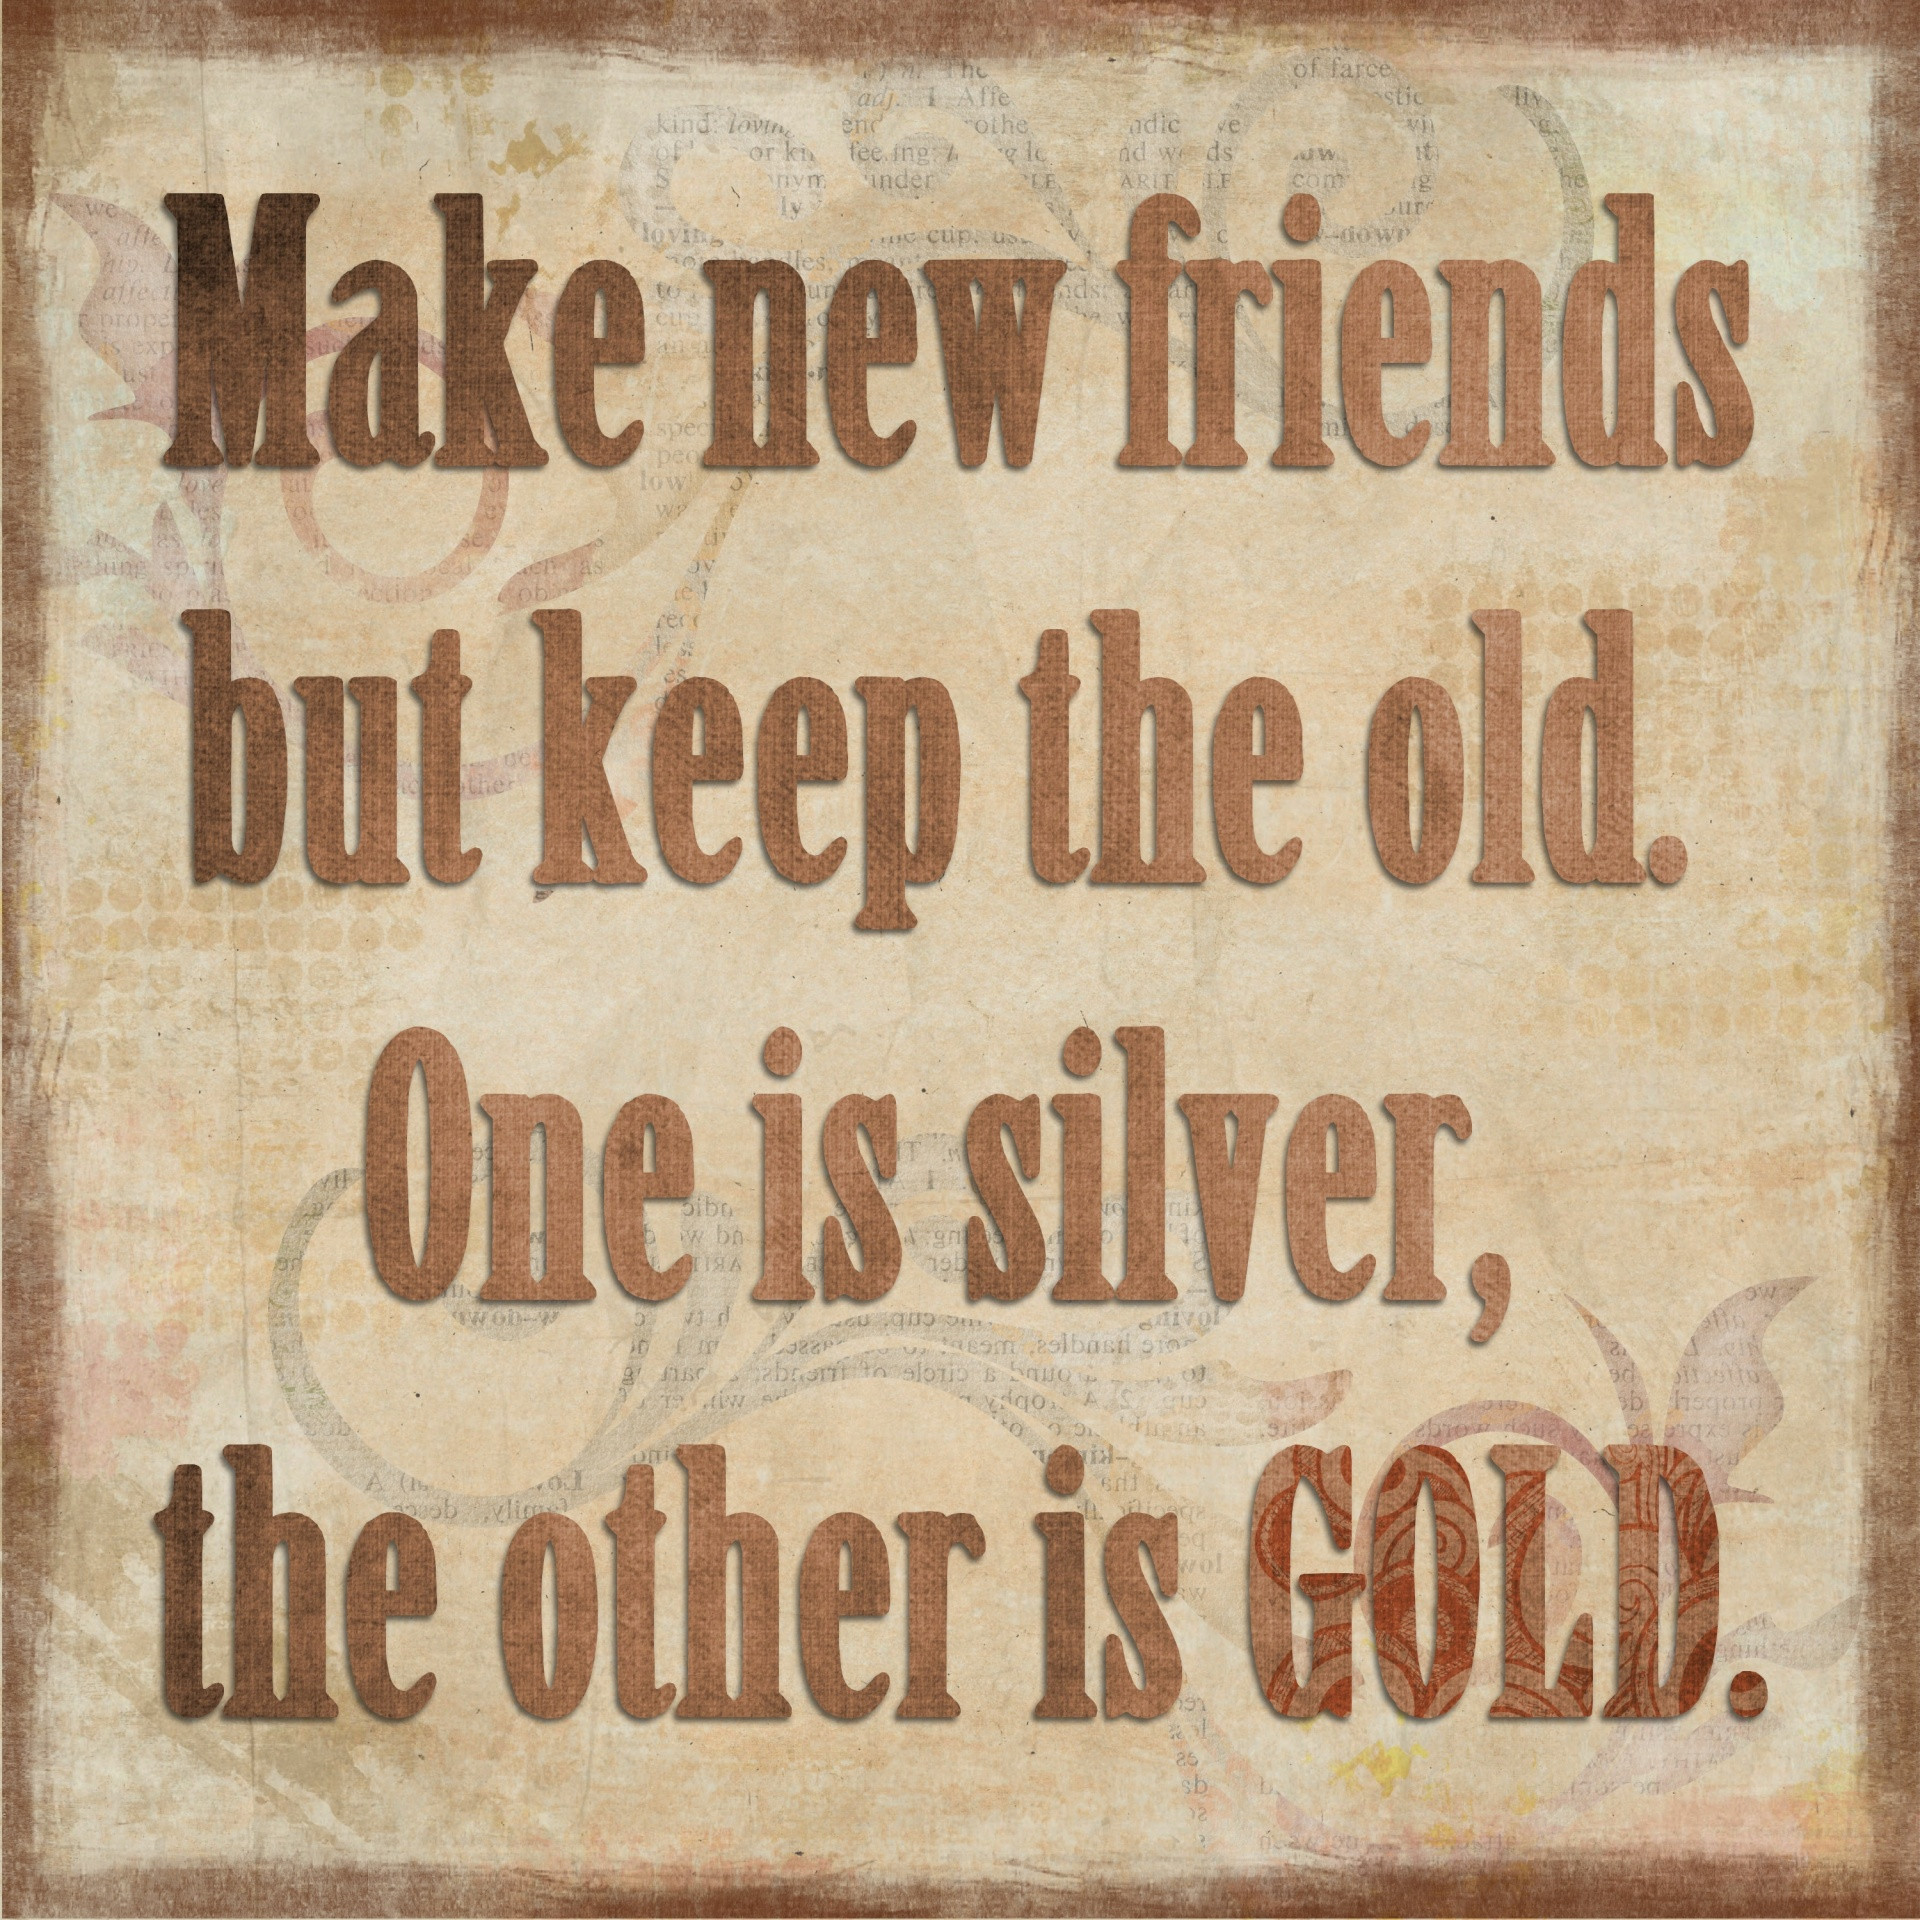 Positive Quotes For Friends
 The Poetry of Making New Friends